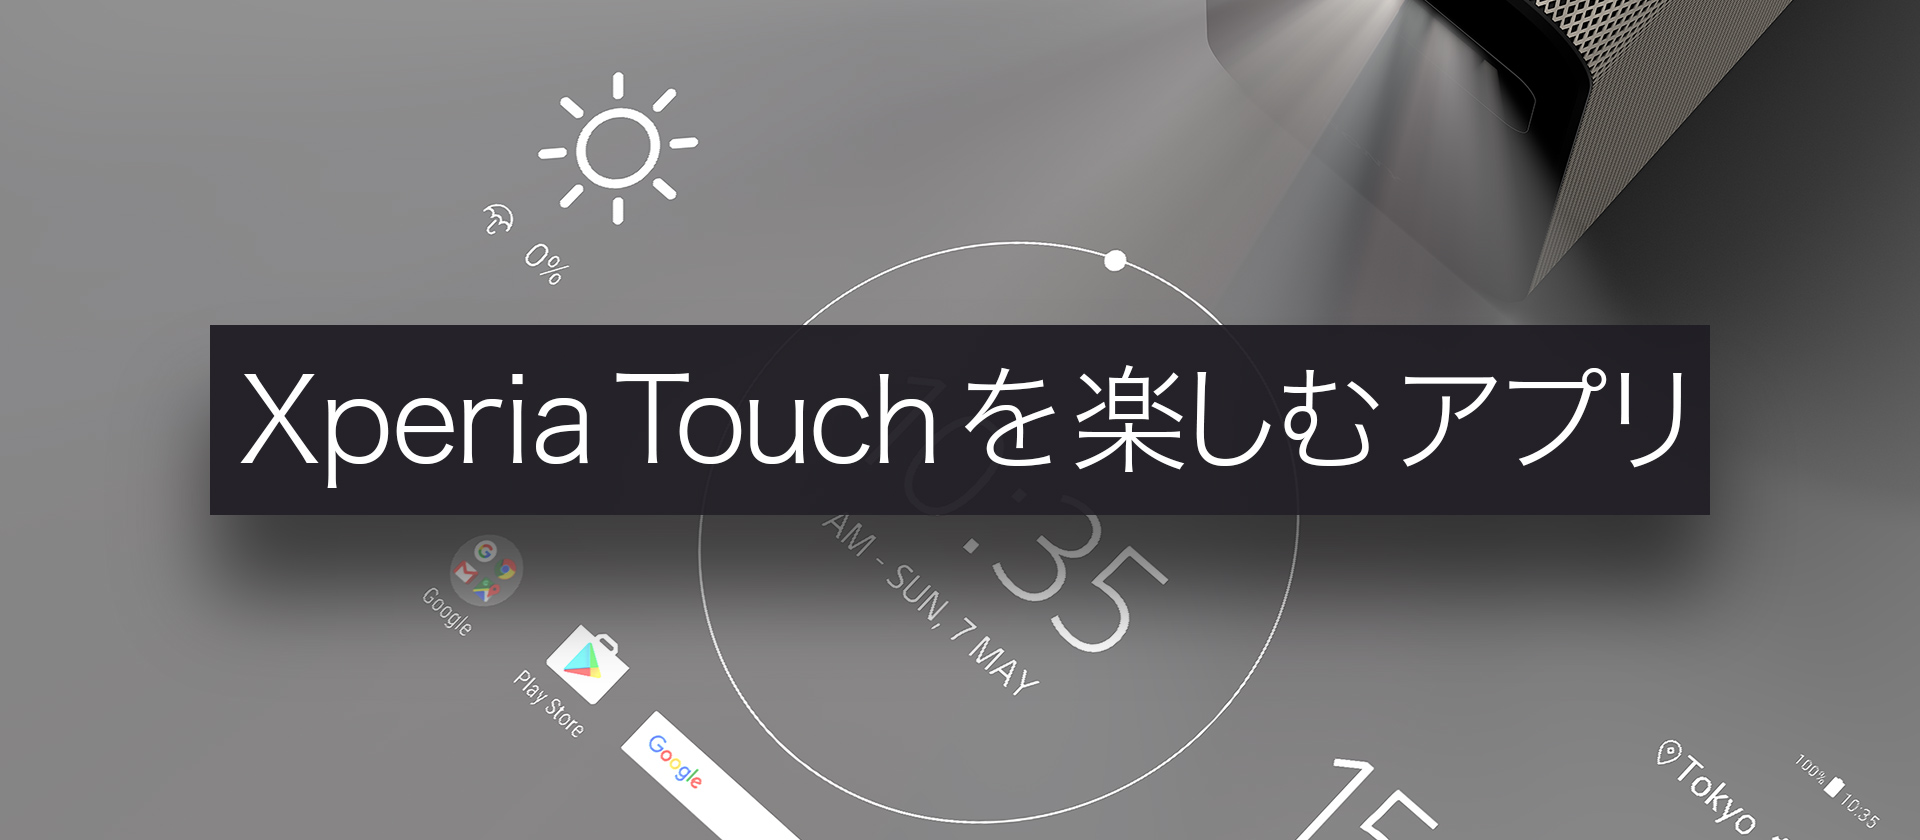 Xperia Touchを楽しむアプリ